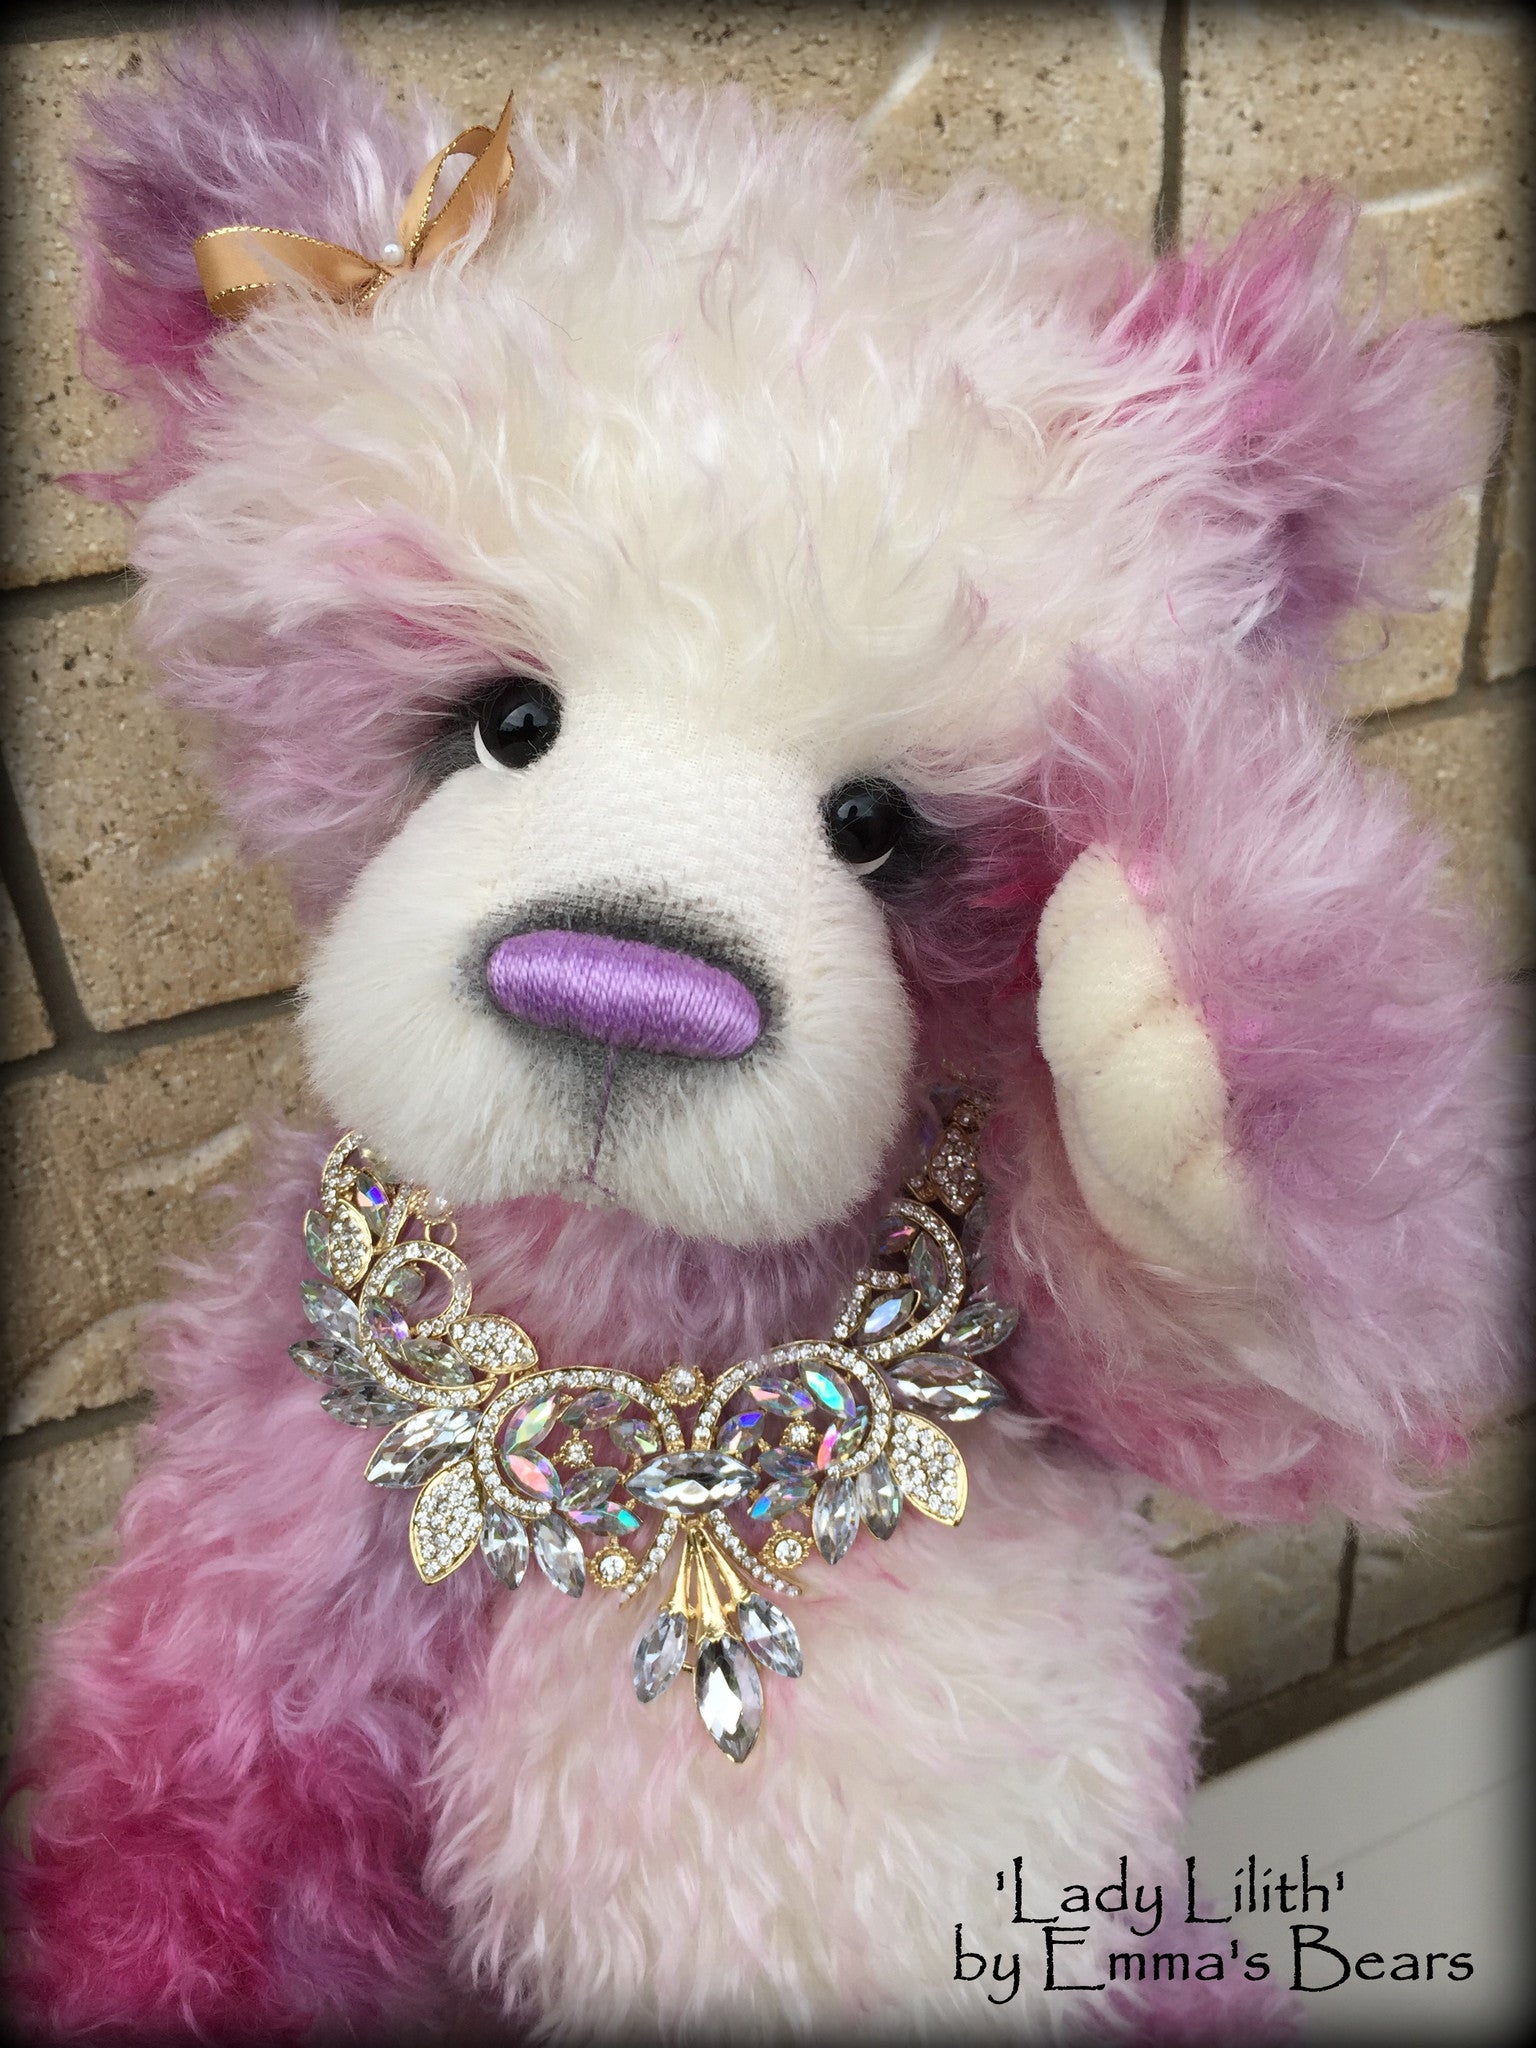 Lady Lilith - 22IN hand dyed mohair and alpaca bear by Emmas Bears - OOAK